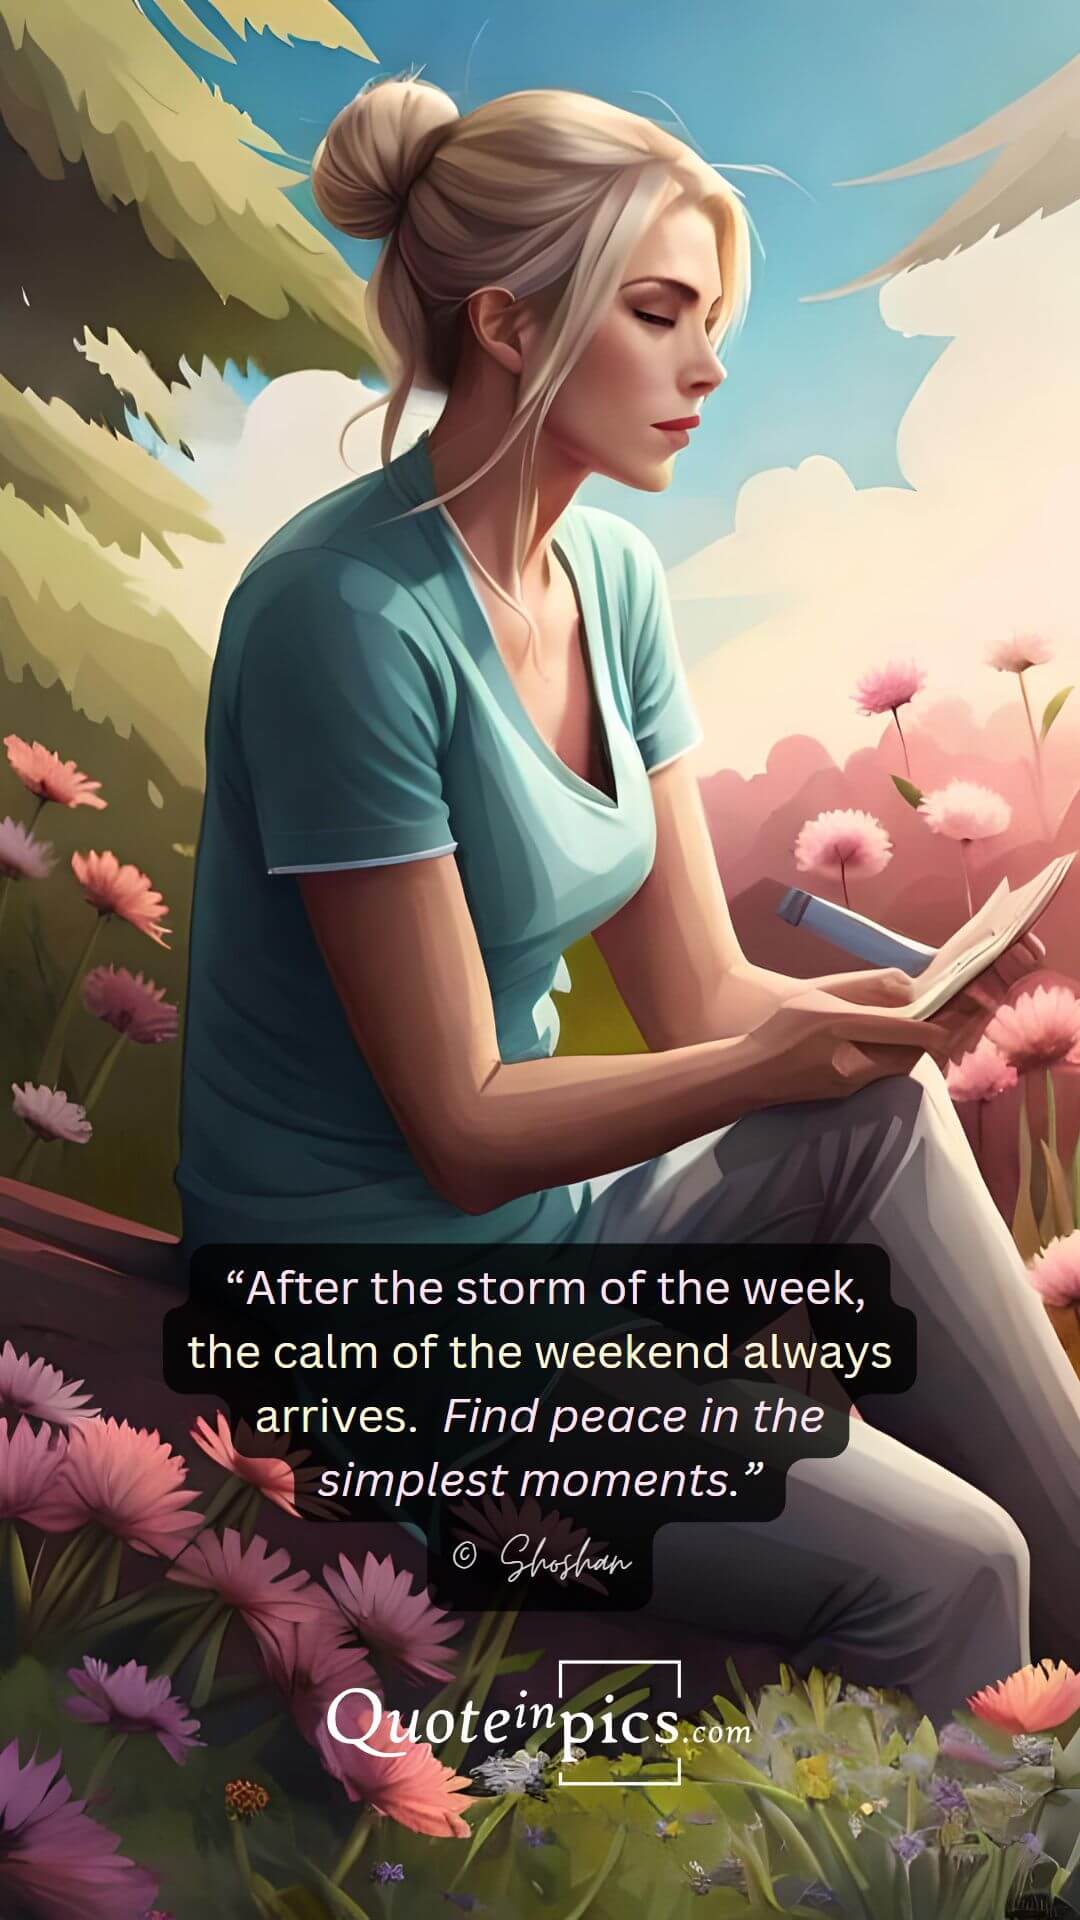 After the storm: this weekend, find peace